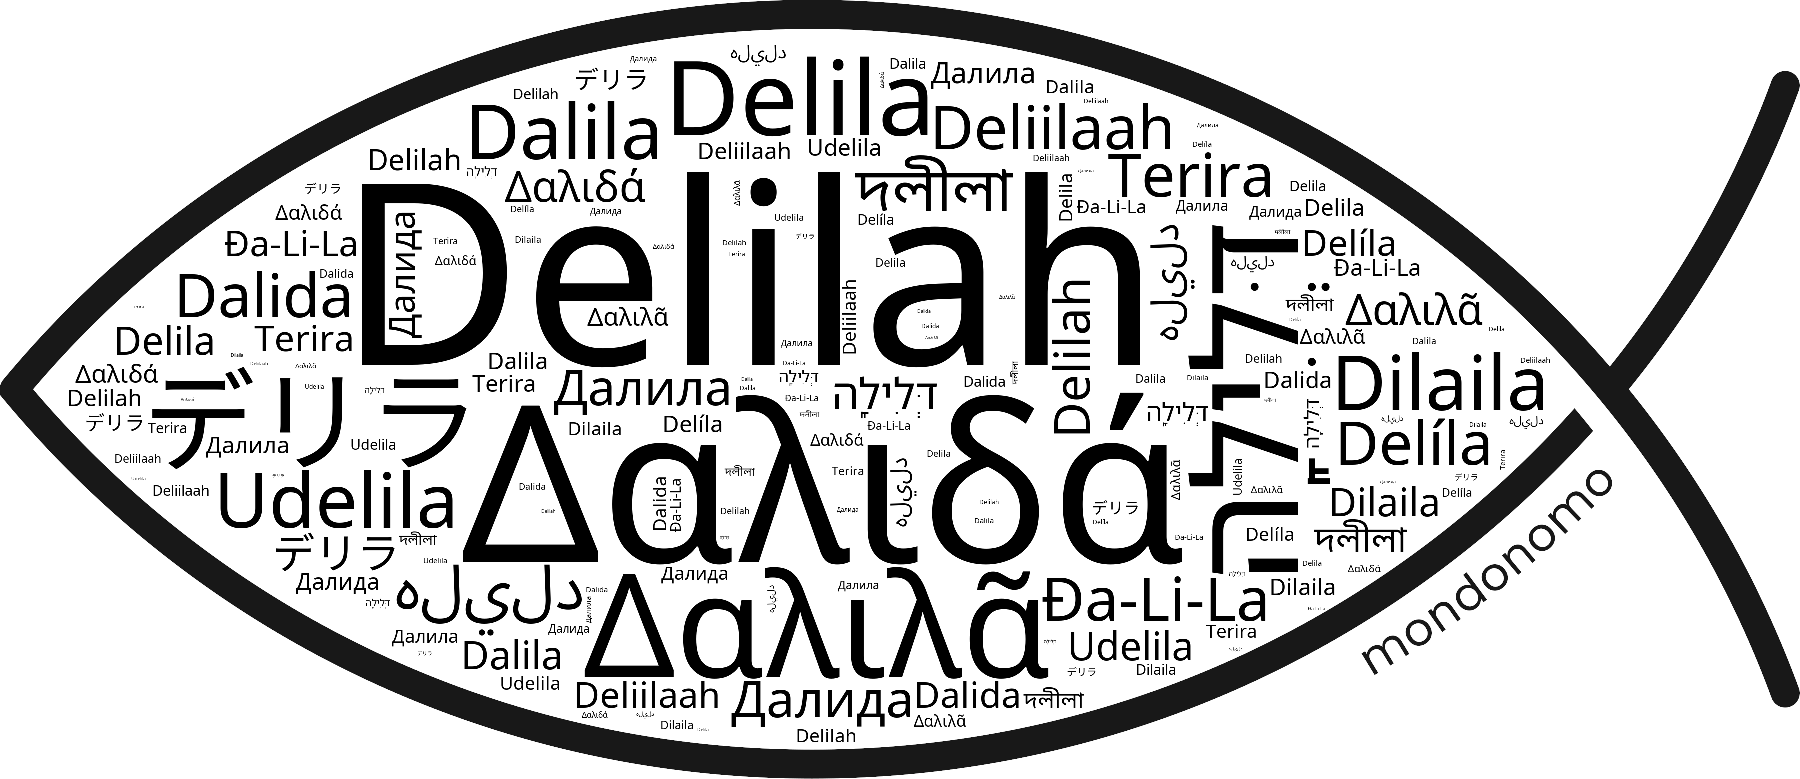 Name Delilah in the world's Bibles